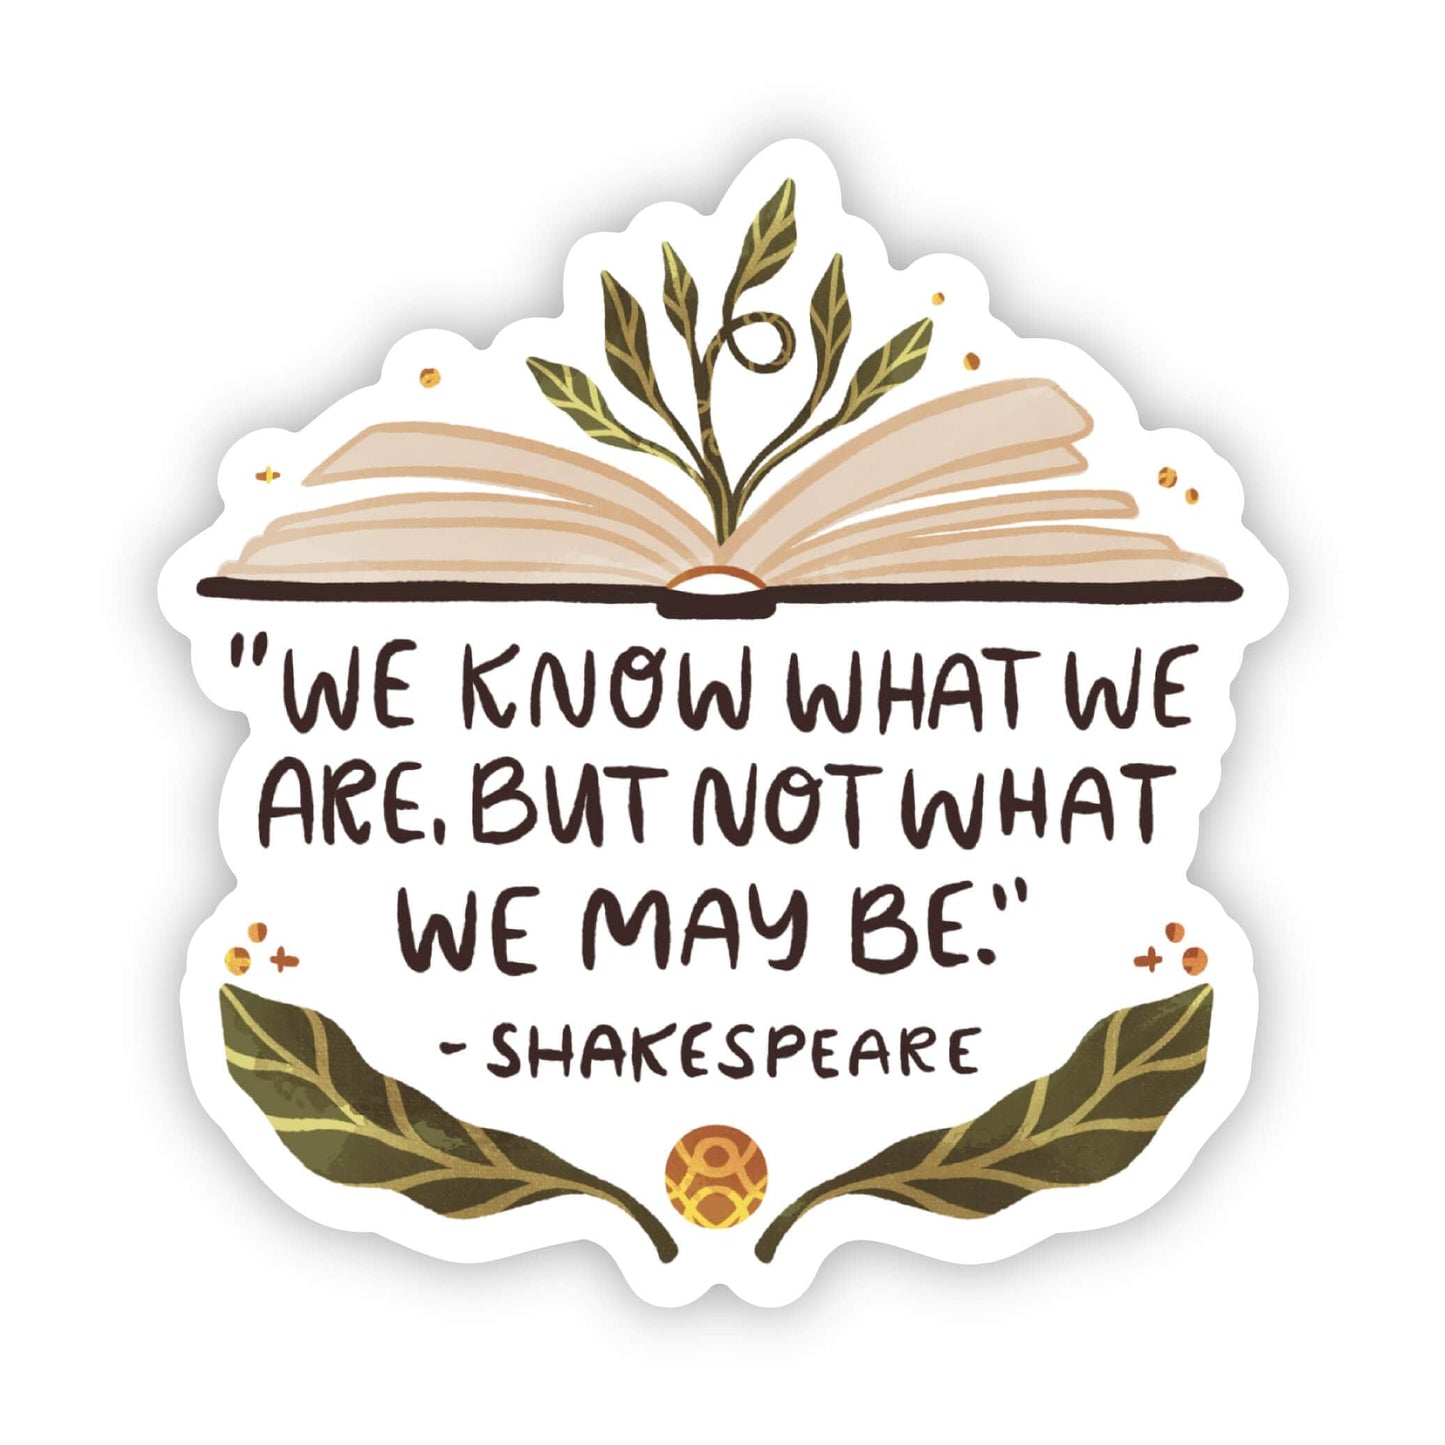 "We know what we are, but not what we may be" - Shakespeare